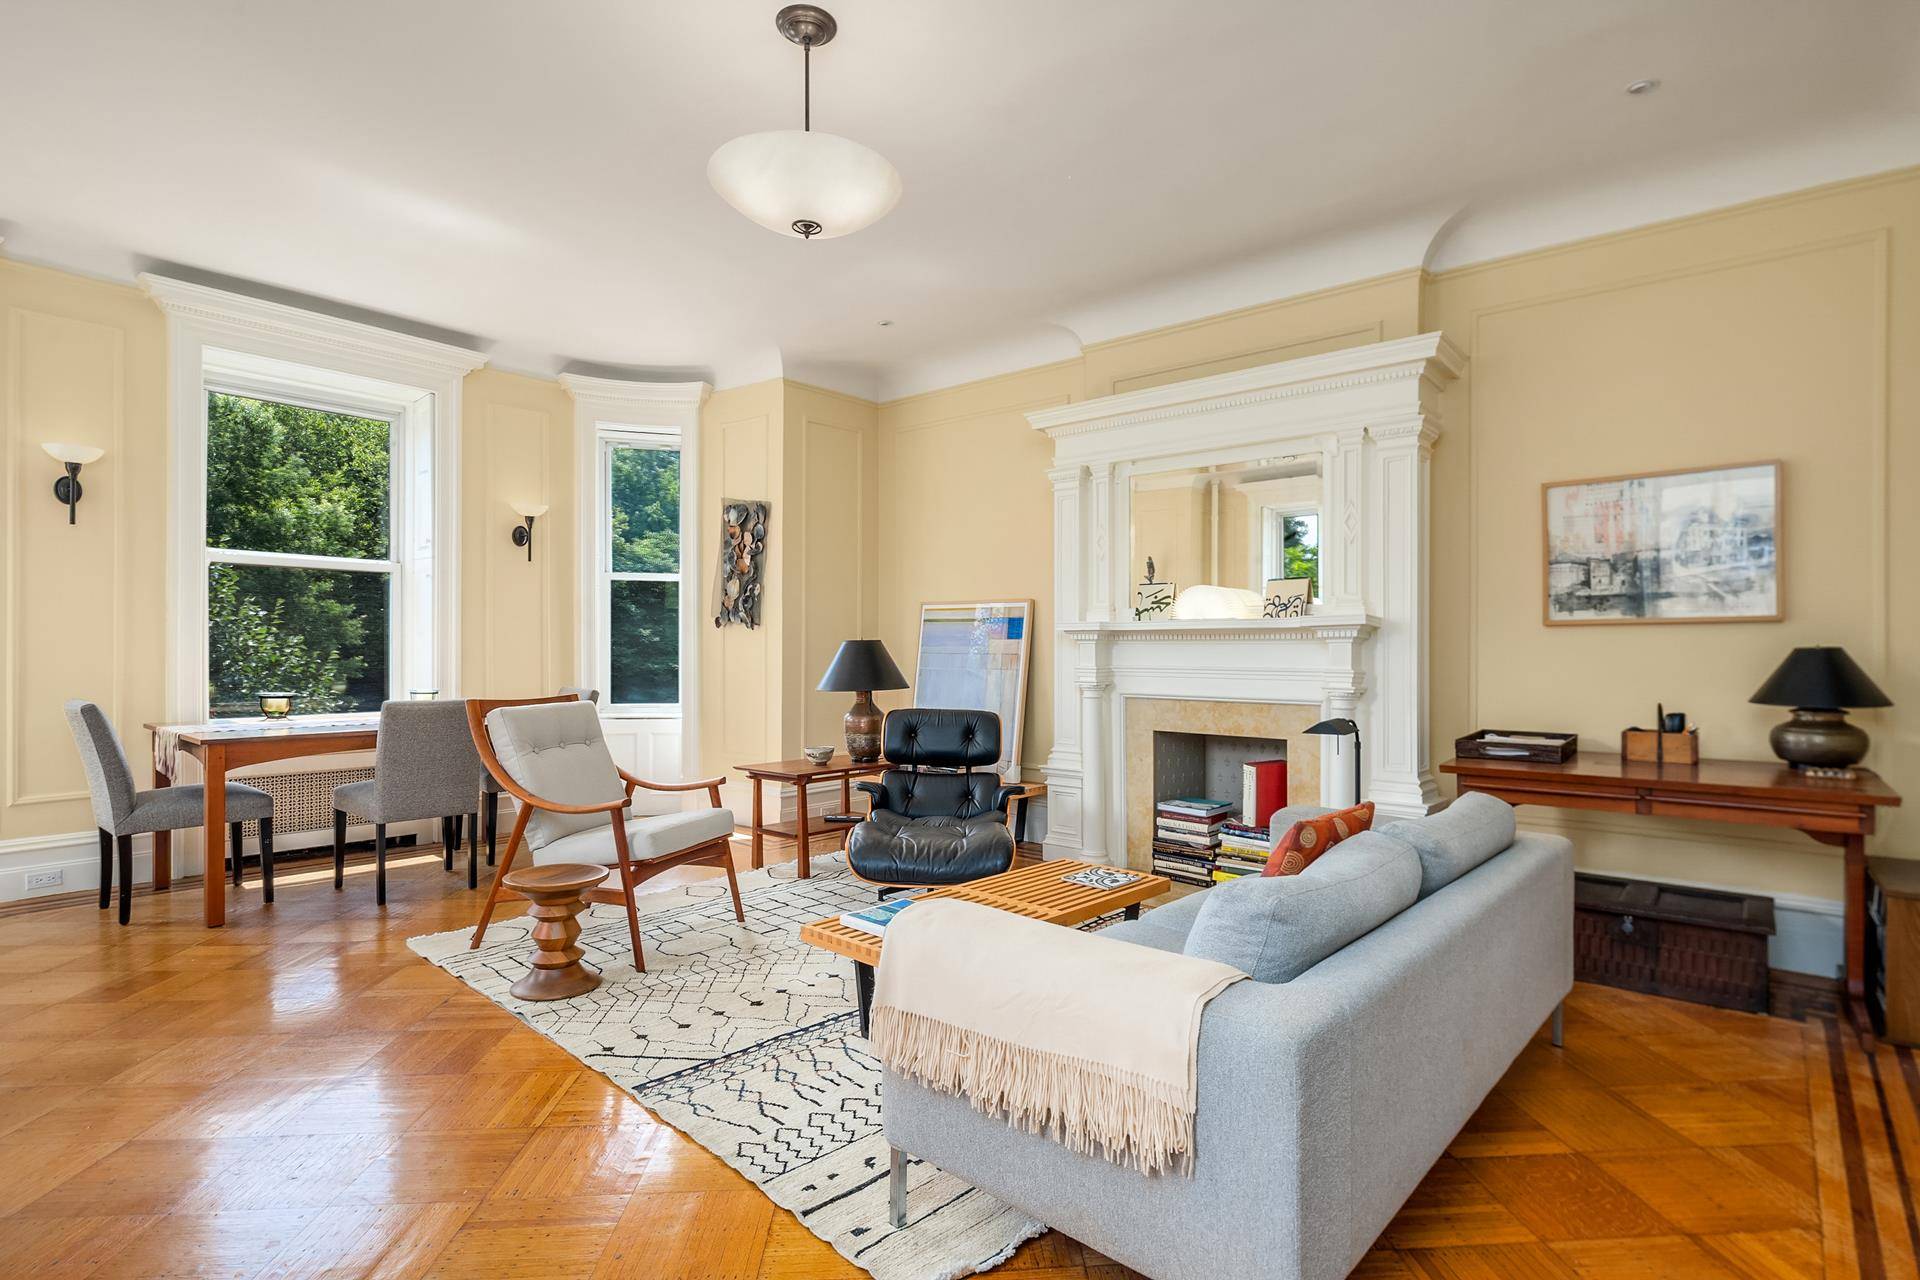 A historic gem with classic appeal, thoughtfully redesigned for the modern homebuyer.